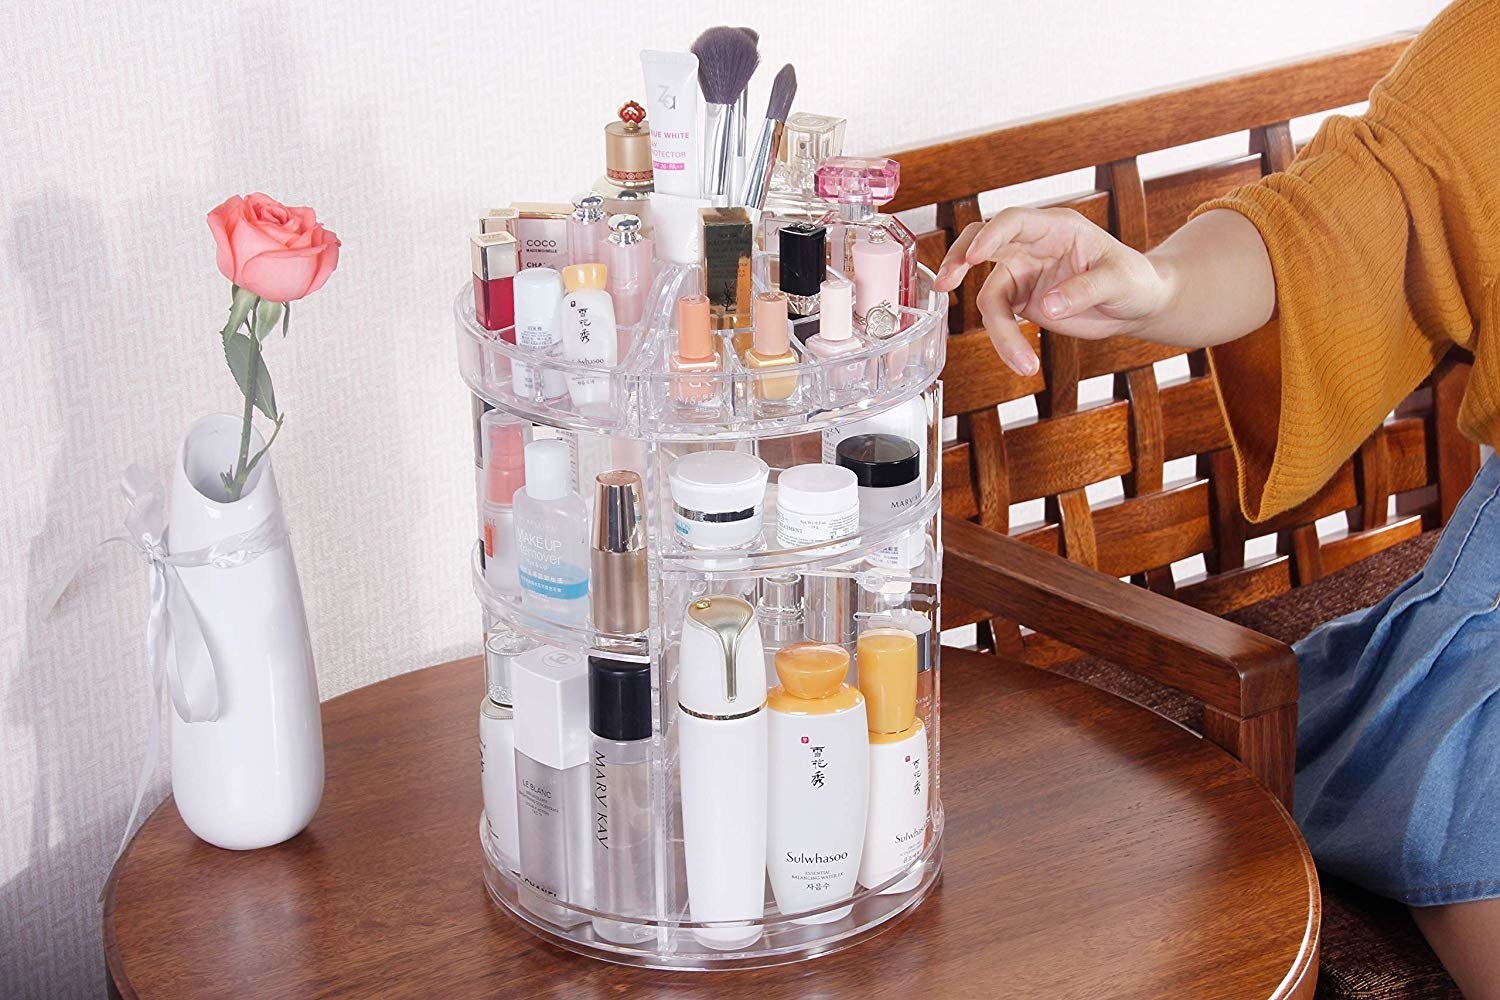 clear makeup carousel-like organizer on tabletop